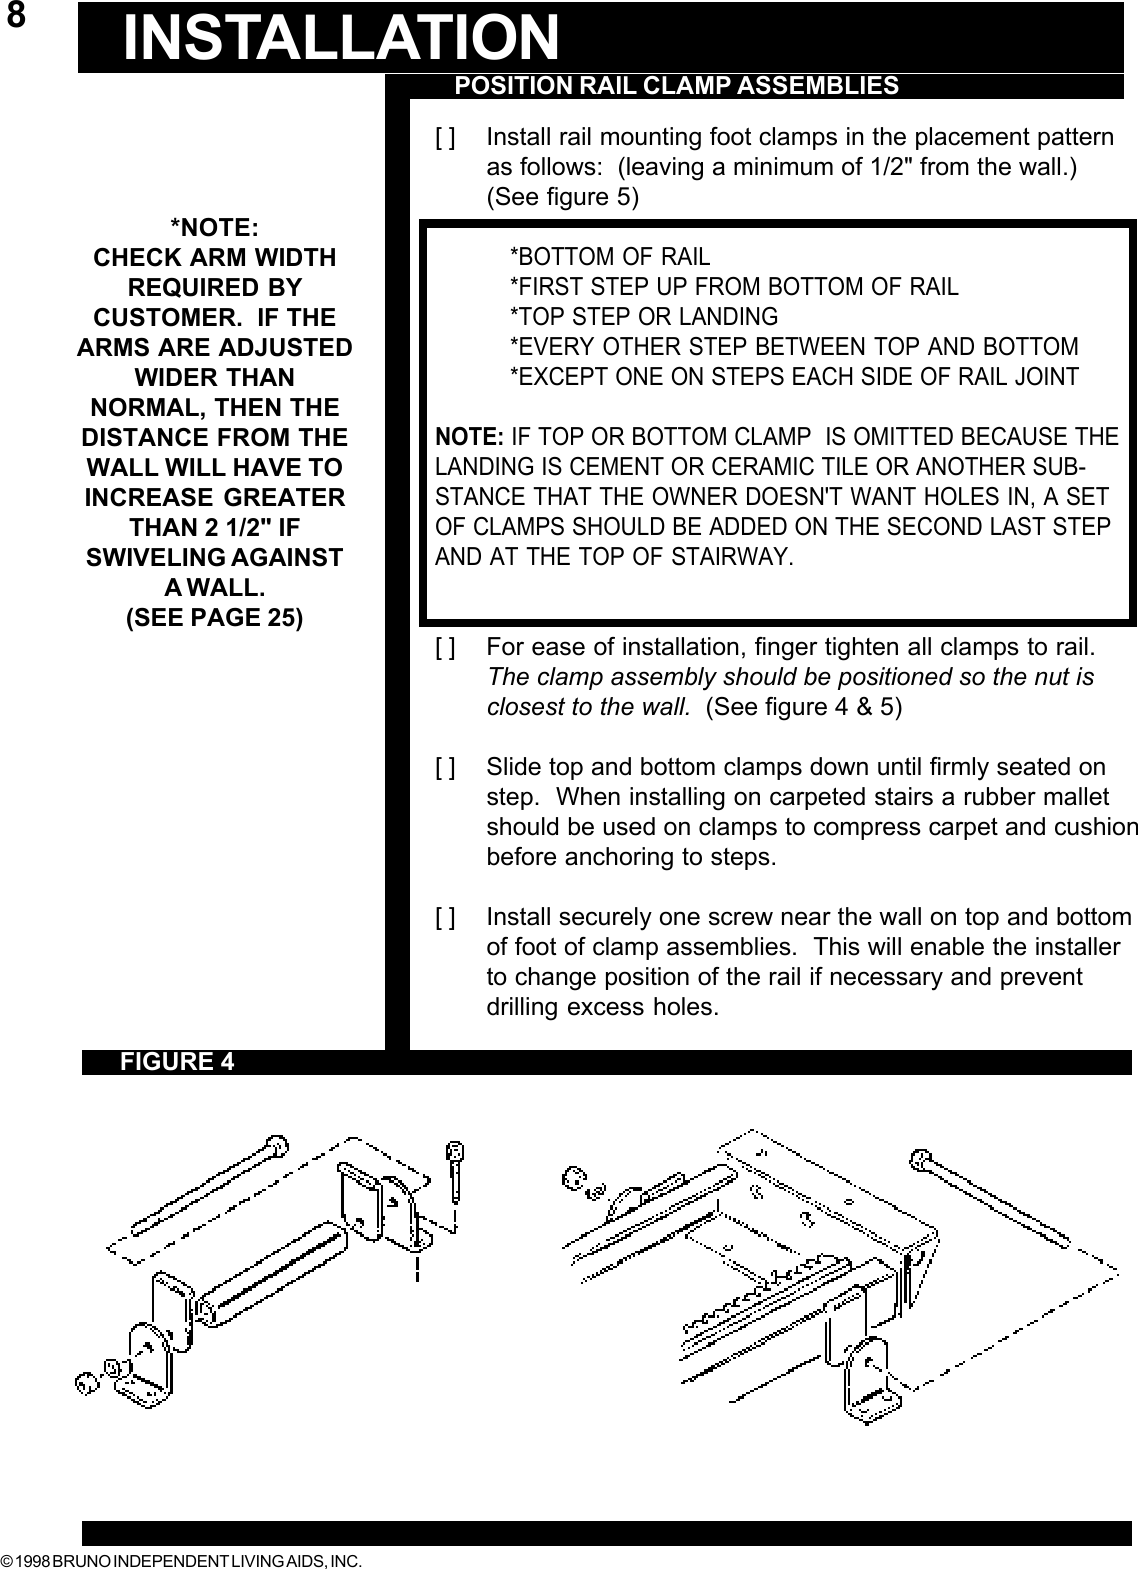 © 1998 BRUNO INDEPENDENT LIVING AIDS, INC.8[ ] Install rail mounting foot clamps in the placement patternas follows:  (leaving a minimum of 1/2&quot; from the wall.)(See figure 5)*BOTTOM OF RAIL*FIRST STEP UP FROM BOTTOM OF RAIL*TOP STEP OR LANDING*EVERY OTHER STEP BETWEEN TOP AND BOTTOM*EXCEPT ONE ON STEPS EACH SIDE OF RAIL JOINTNOTE: IF TOP OR BOTTOM CLAMP  IS OMITTED BECAUSE THELANDING IS CEMENT OR CERAMIC TILE OR ANOTHER SUB-STANCE THAT THE OWNER DOESN&apos;T WANT HOLES IN, A SETOF CLAMPS SHOULD BE ADDED ON THE SECOND LAST STEPAND AT THE TOP OF STAIRWAY.[ ] For ease of installation, finger tighten all clamps to rail.The clamp assembly should be positioned so the nut isclosest to the wall.  (See figure 4 &amp; 5)[ ] Slide top and bottom clamps down until firmly seated onstep.  When installing on carpeted stairs a rubber malletshould be used on clamps to compress carpet and cushionbefore anchoring to steps.[ ] Install securely one screw near the wall on top and bottomof foot of clamp assemblies.  This will enable the installerto change position of the rail if necessary and preventdrilling excess holes.POSITION RAIL CLAMP ASSEMBLIESINSTALLATIONFIGURE 4*NOTE:CHECK ARM WIDTHREQUIRED BYCUSTOMER.  IF THEARMS ARE ADJUSTEDWIDER THANNORMAL, THEN THEDISTANCE FROM THEWALL WILL HAVE TOINCREASE GREATERTHAN 2 1/2&quot; IFSWIVELING AGAINSTA WALL.(SEE PAGE 25)